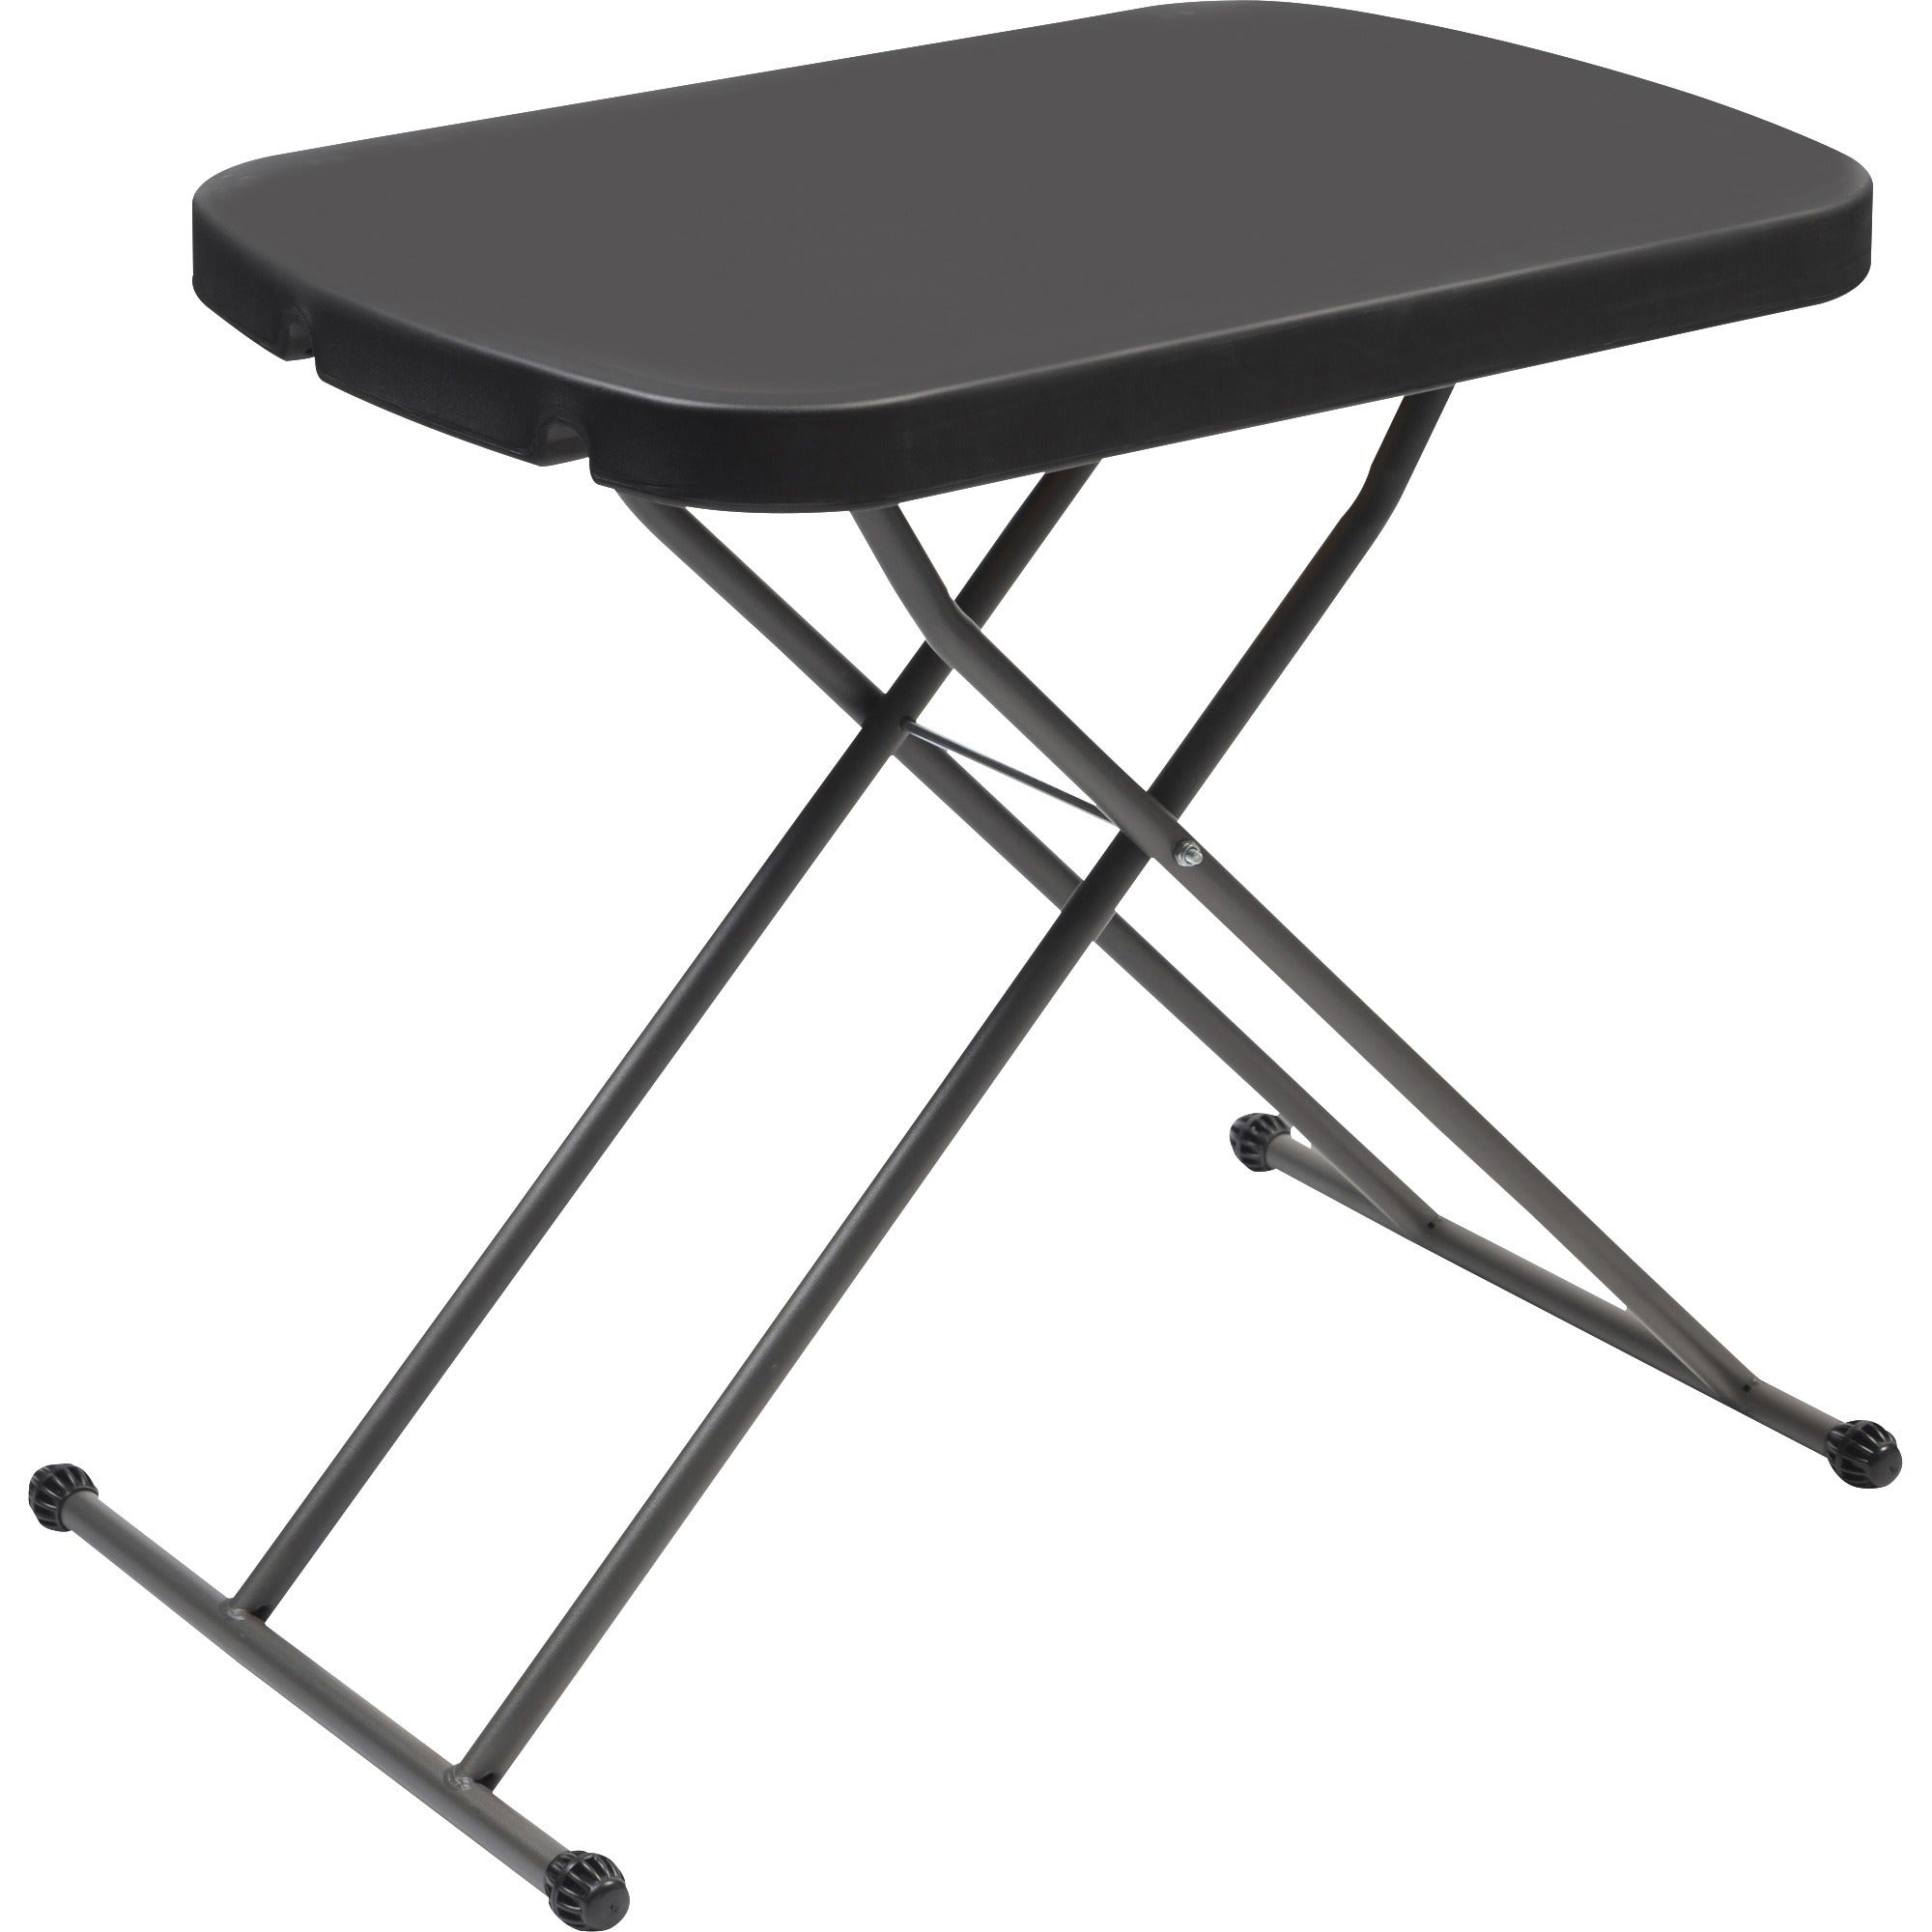 iceberg-indestructable-small-space-personal-table-for-table-topblack-top-25-lb-capacity-adjustable-height-2080-to-2660-adjustment-x-2660-table-top-width-x-1780-table-top-depth-2660-height-high-density-polyethylene-hdpe-resi_ice65498 - 1